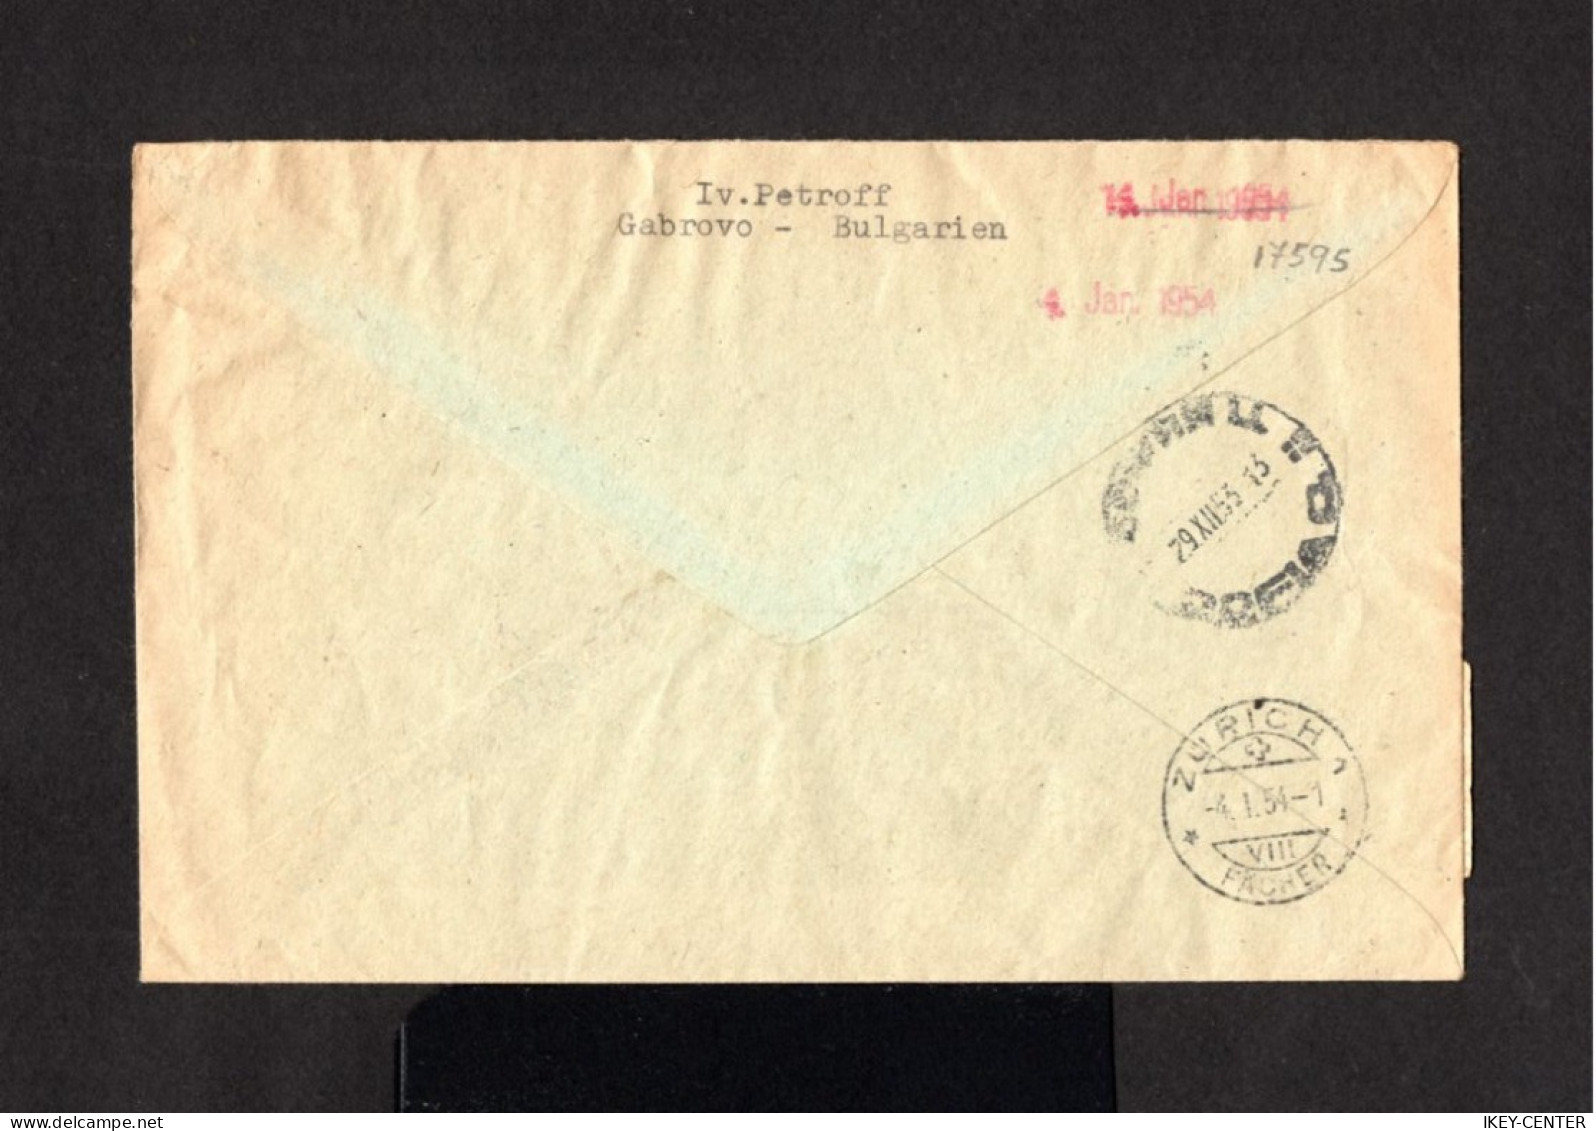 17595-BULGARIA-REGISTERED COVER GABROVO To ZURICH (switzerland) 1953.ENVELOPPE RECOMMANDE Bulgarie. - Lettres & Documents